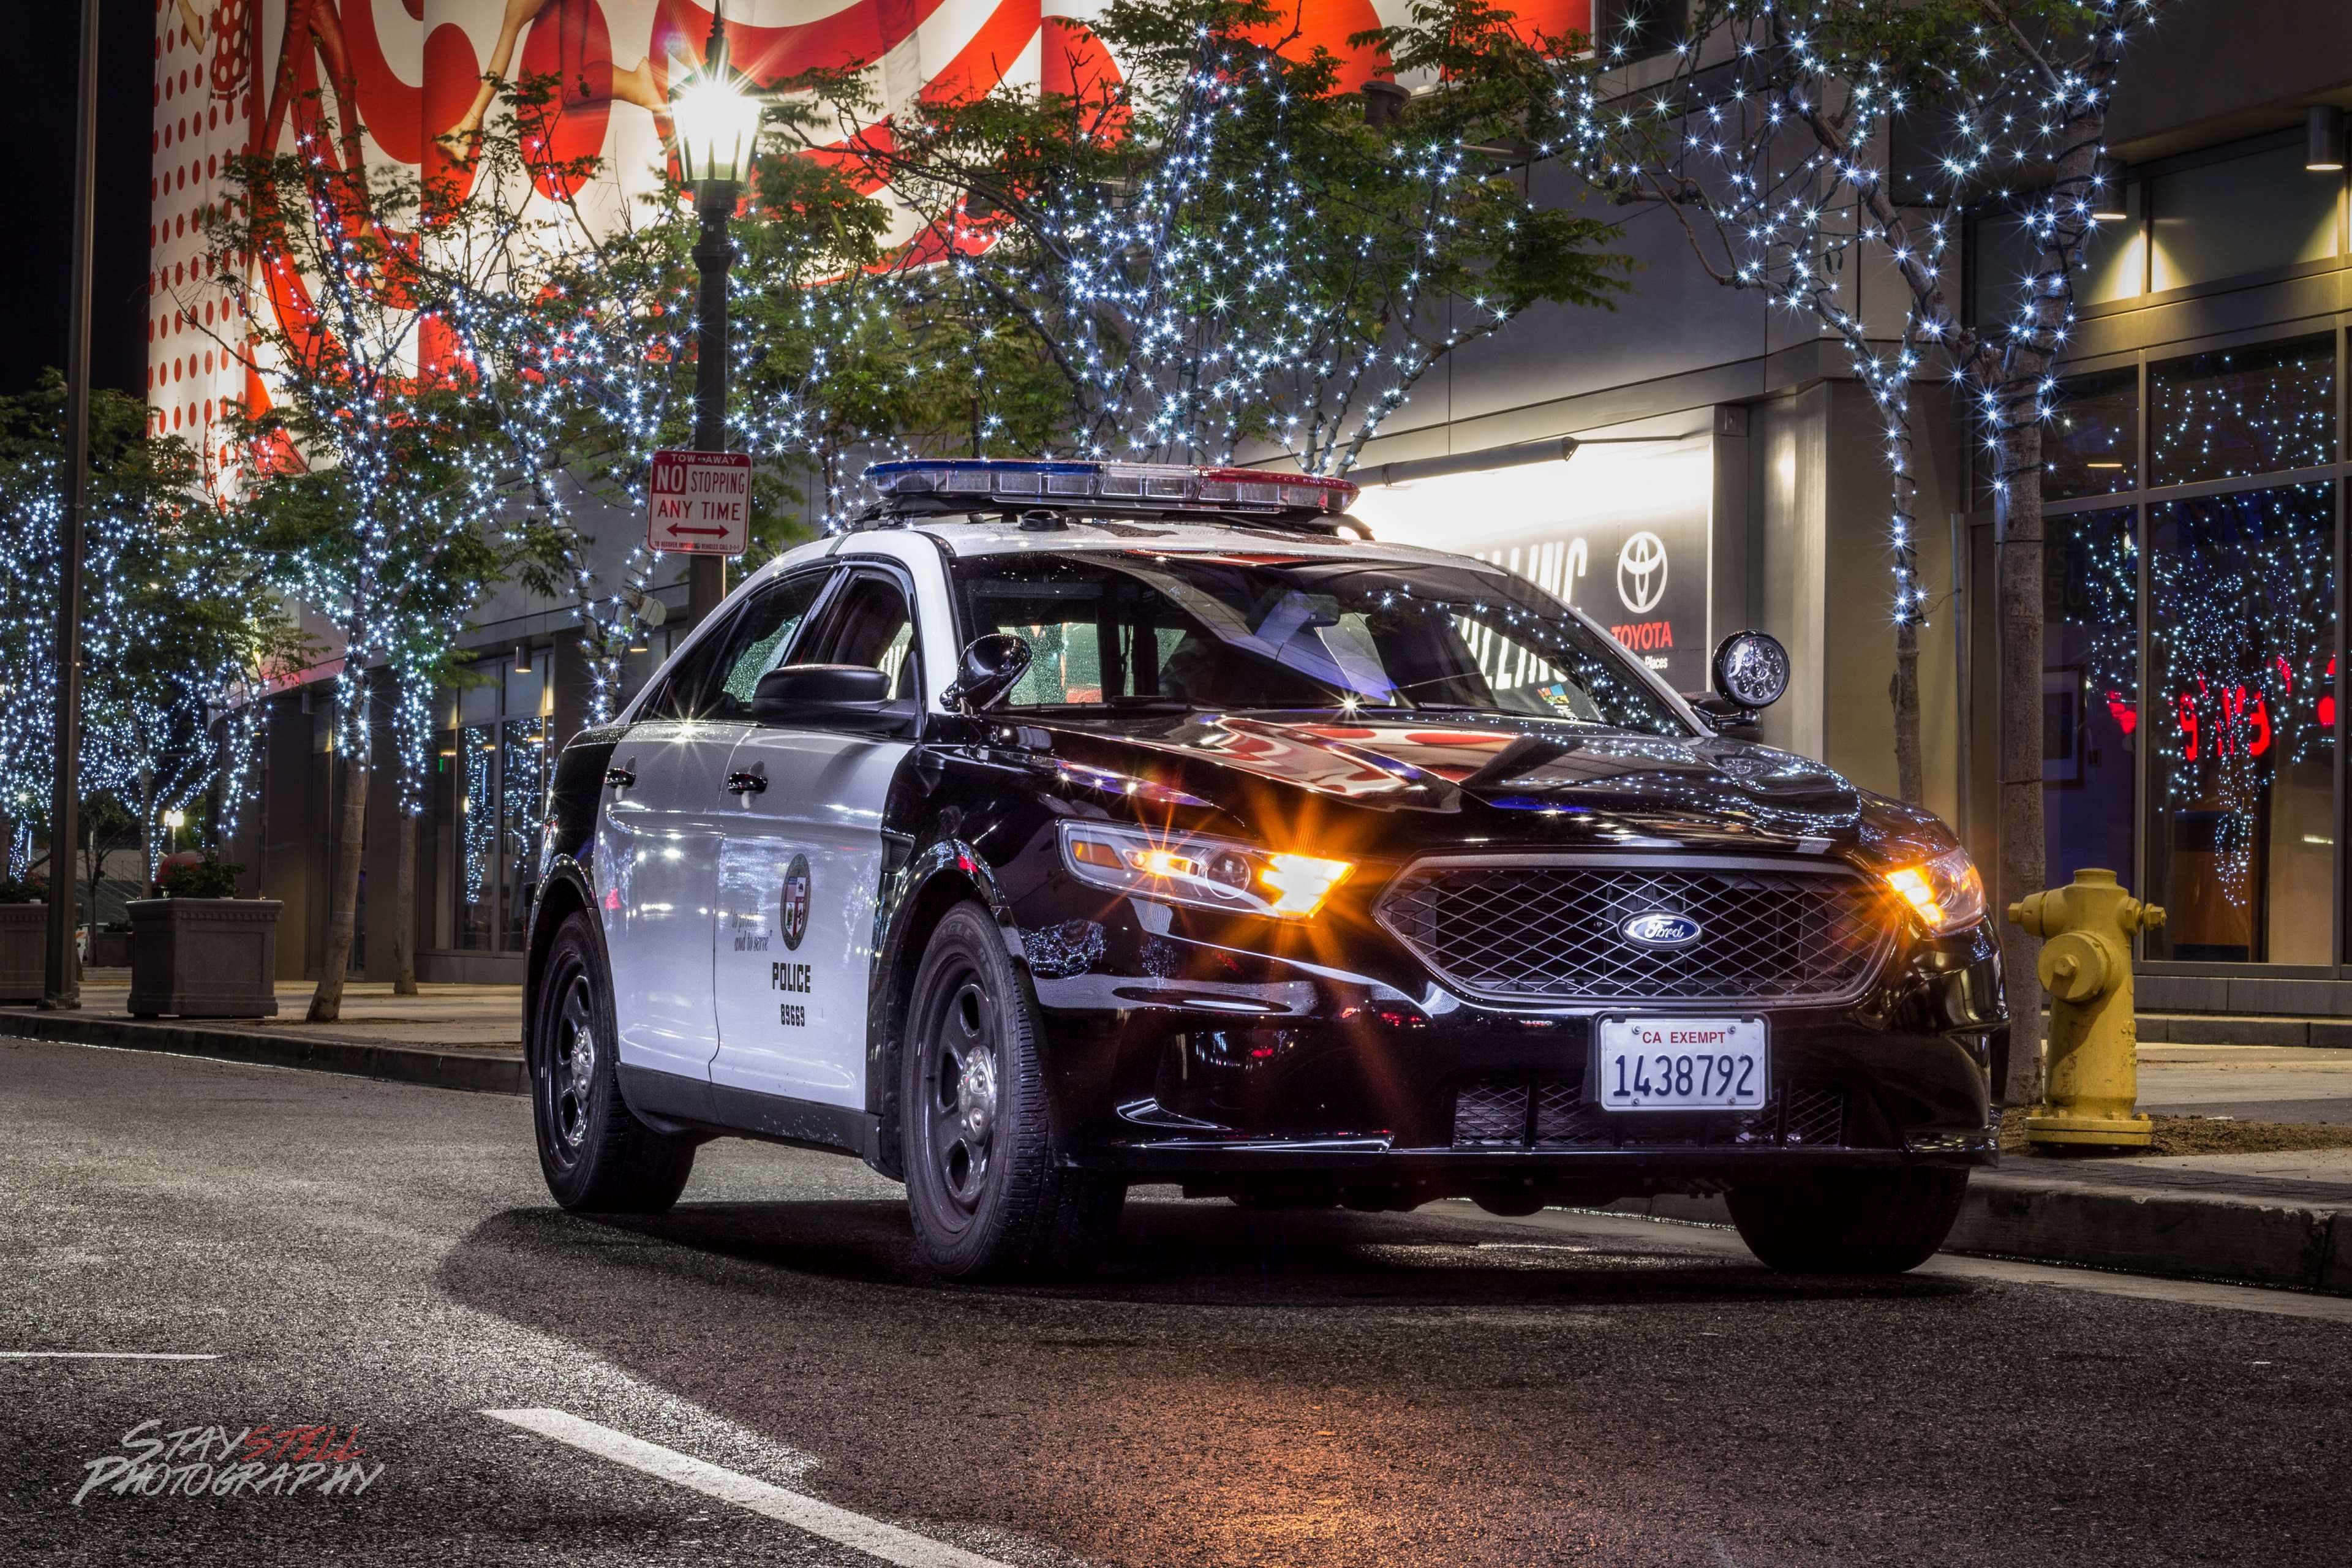 downtown, la, lapd, los angeles, police, police officer 4k wallpaper. Police cars, Police, Lapd